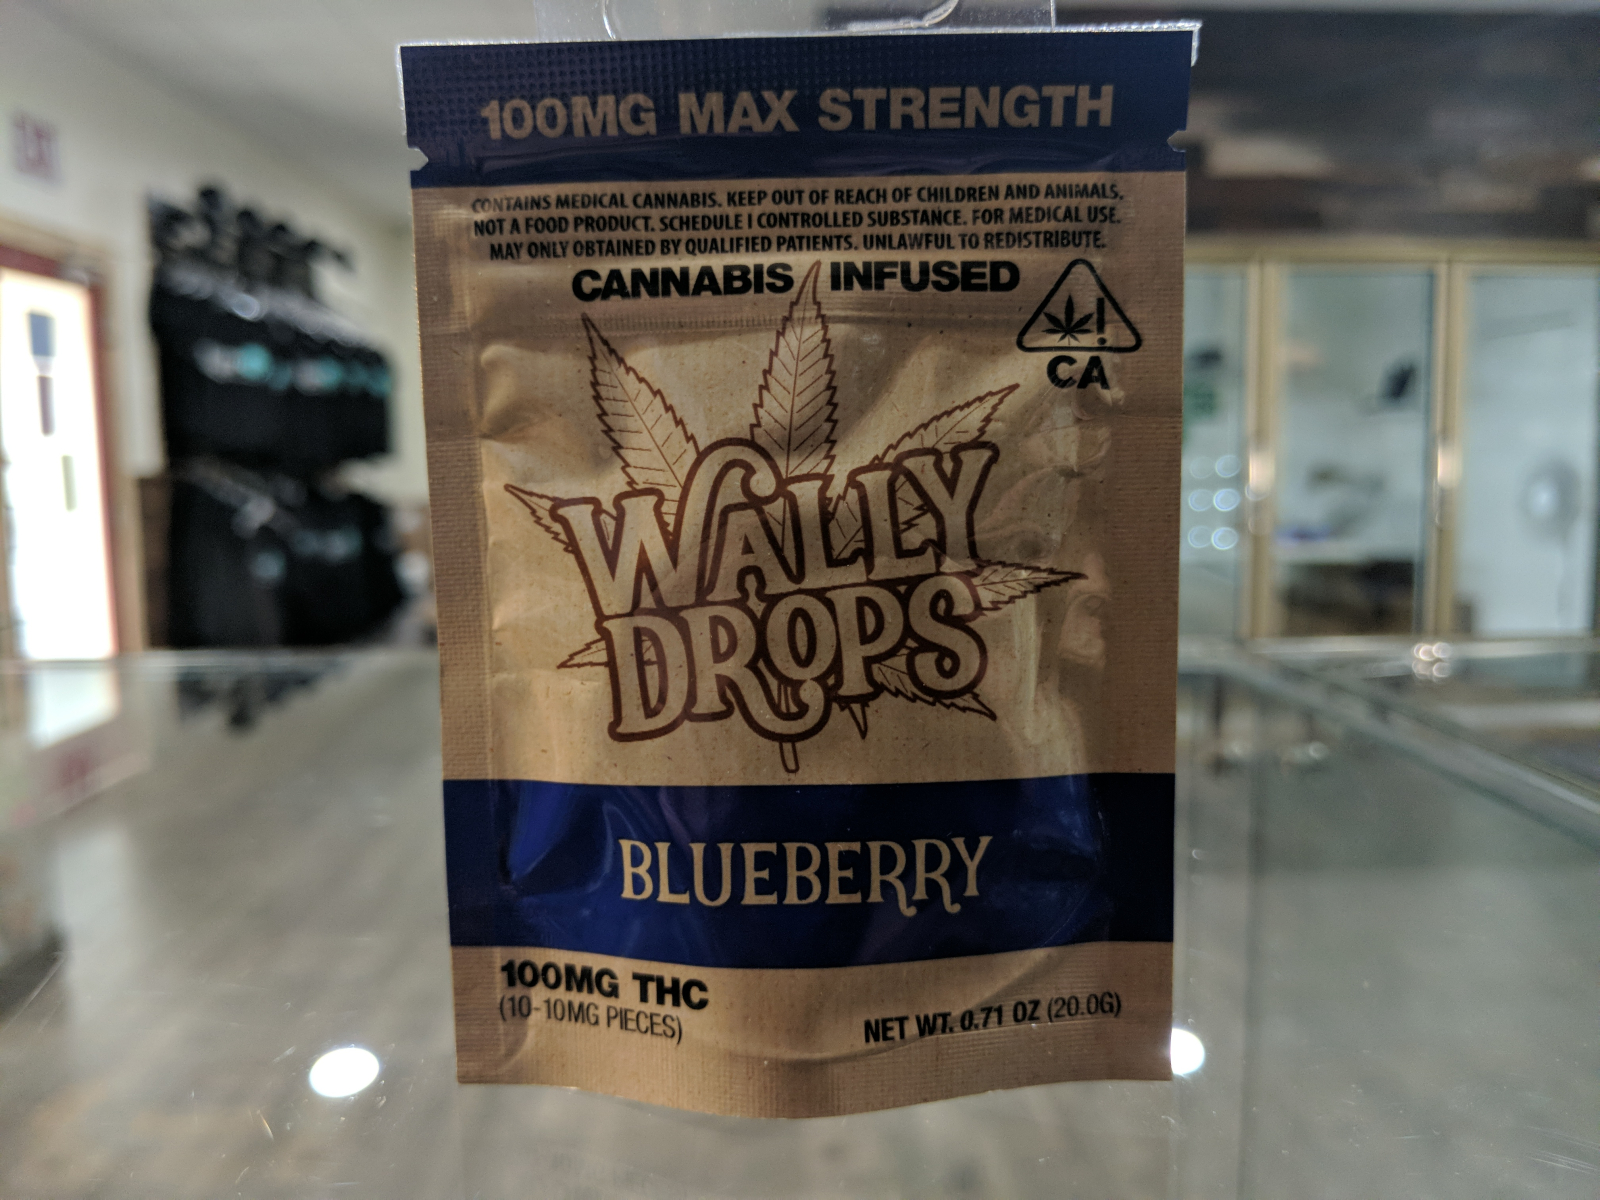 Wally Drops Blueberry 100mg